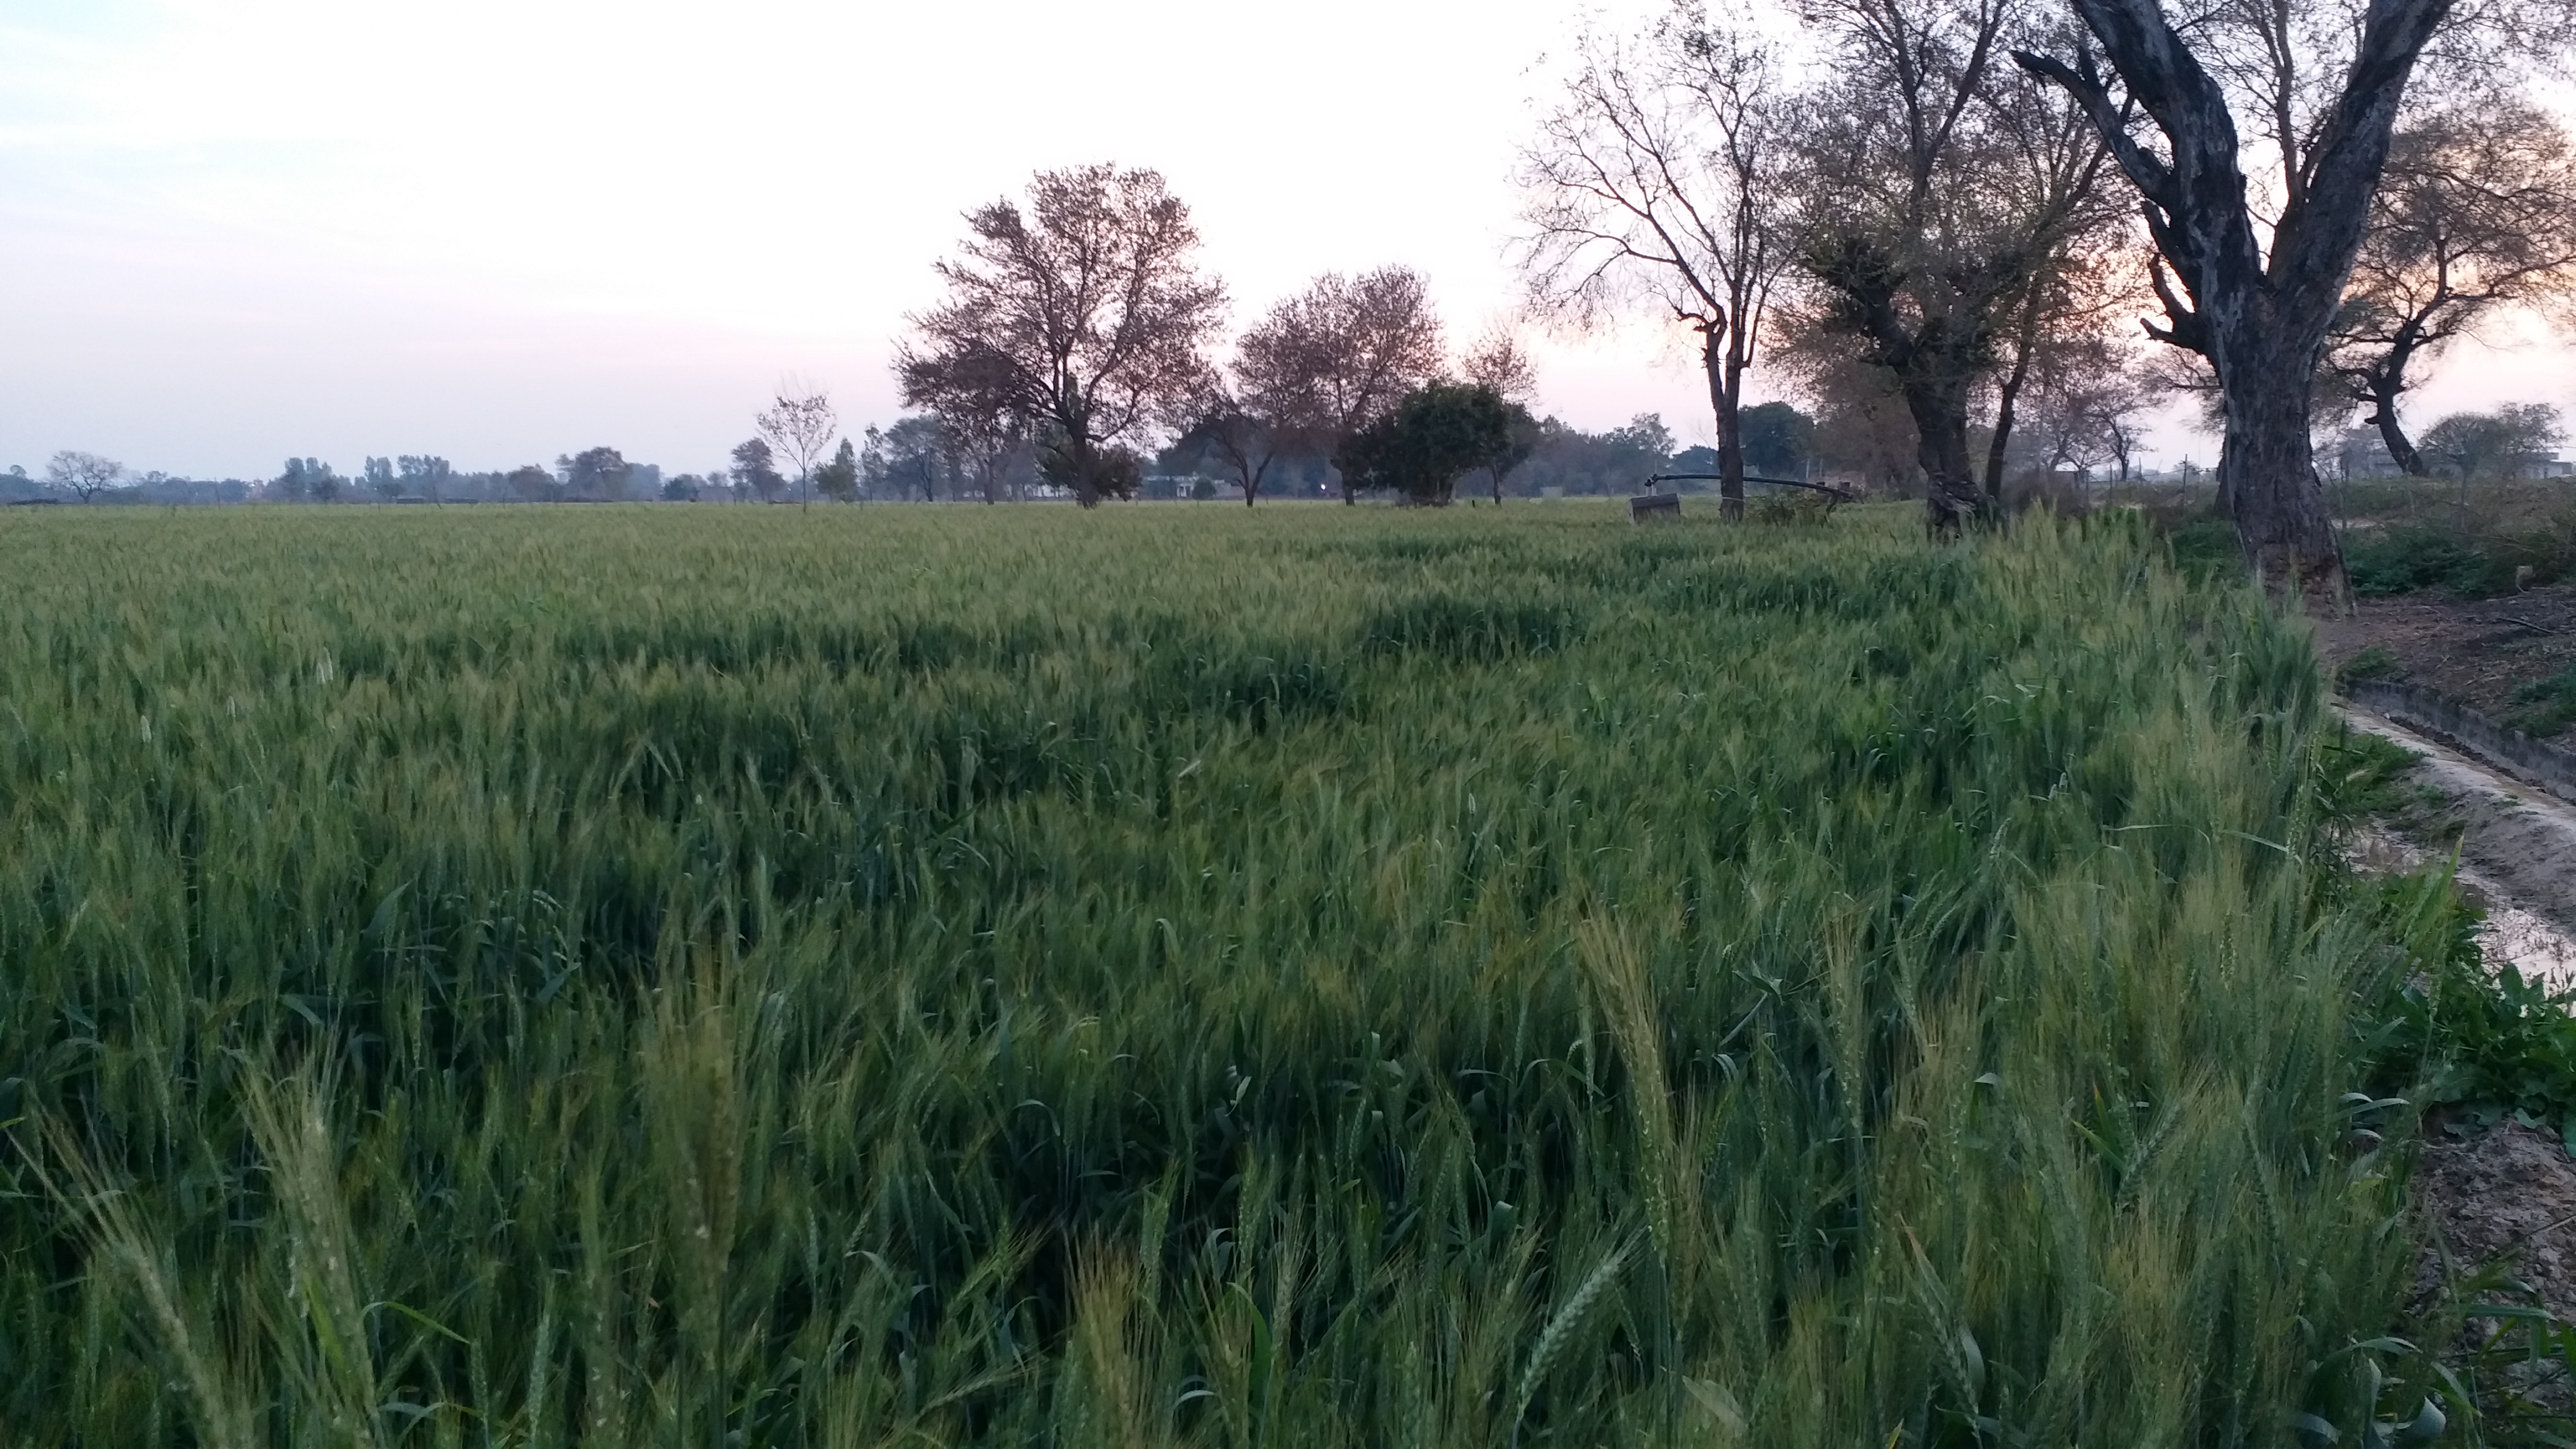 Wheat Cultivation in Haryana